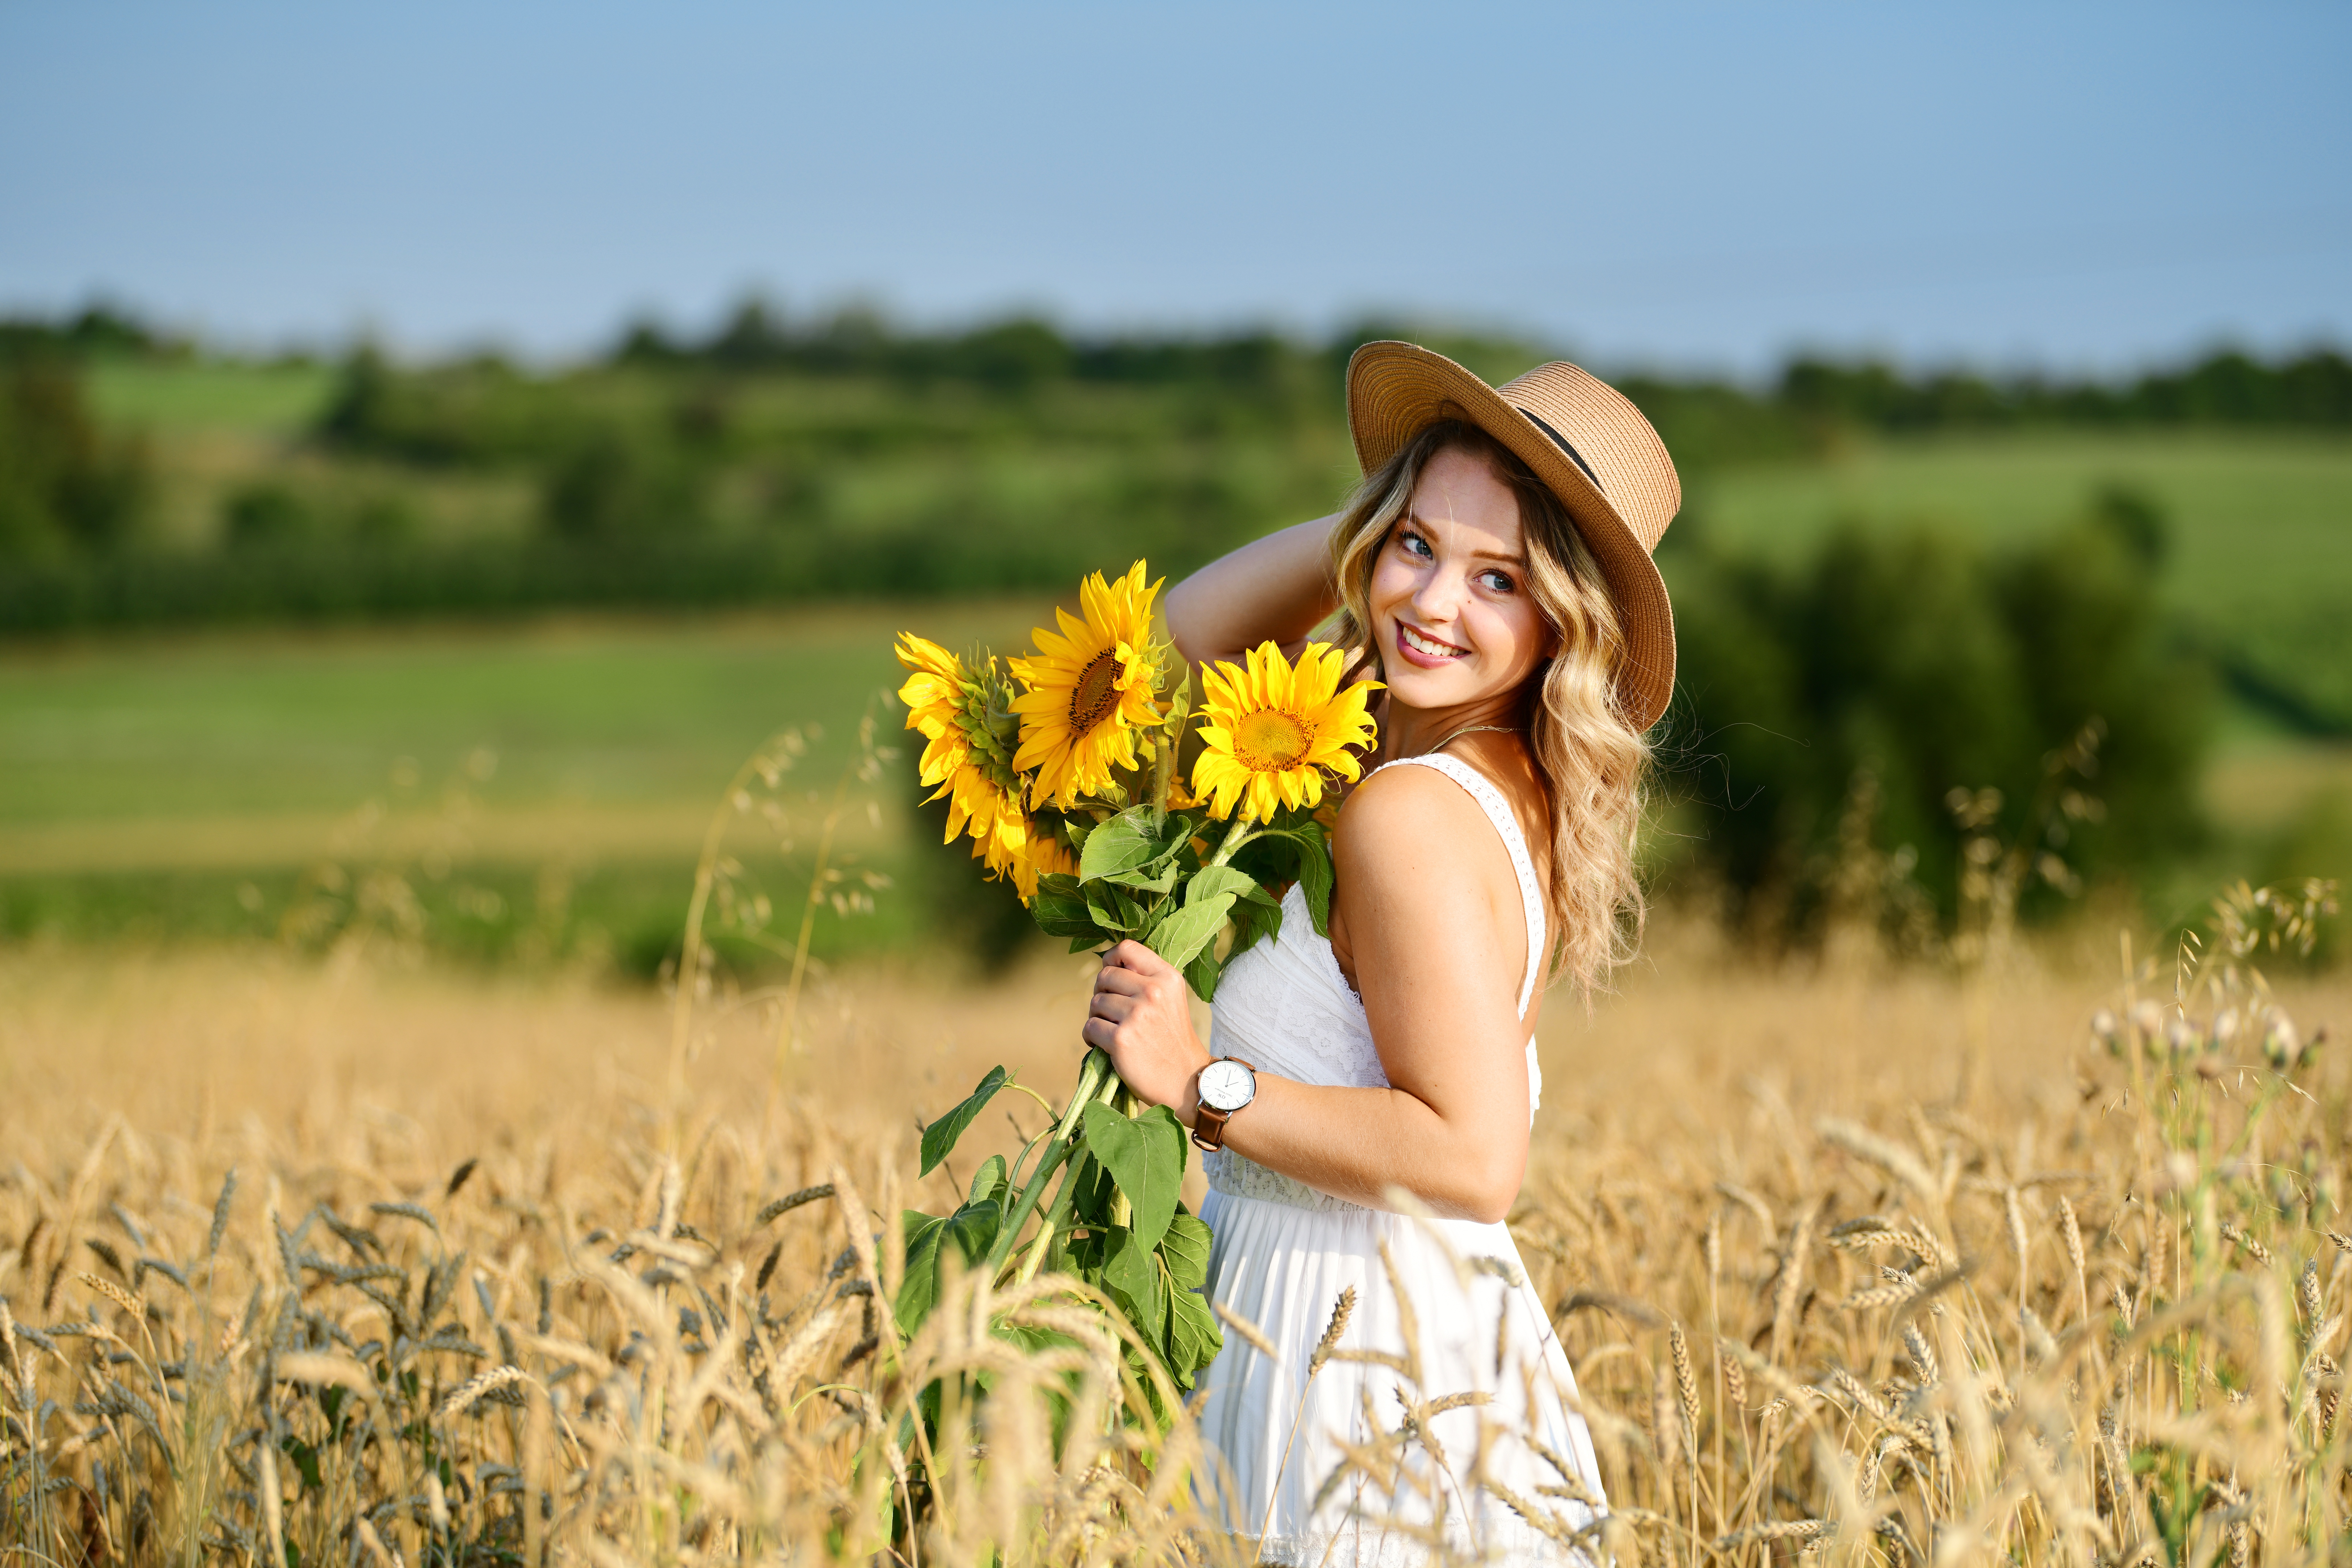 Wallpaper Smiling girl on the field with wheat with a bouquet of sunflowers in hand.